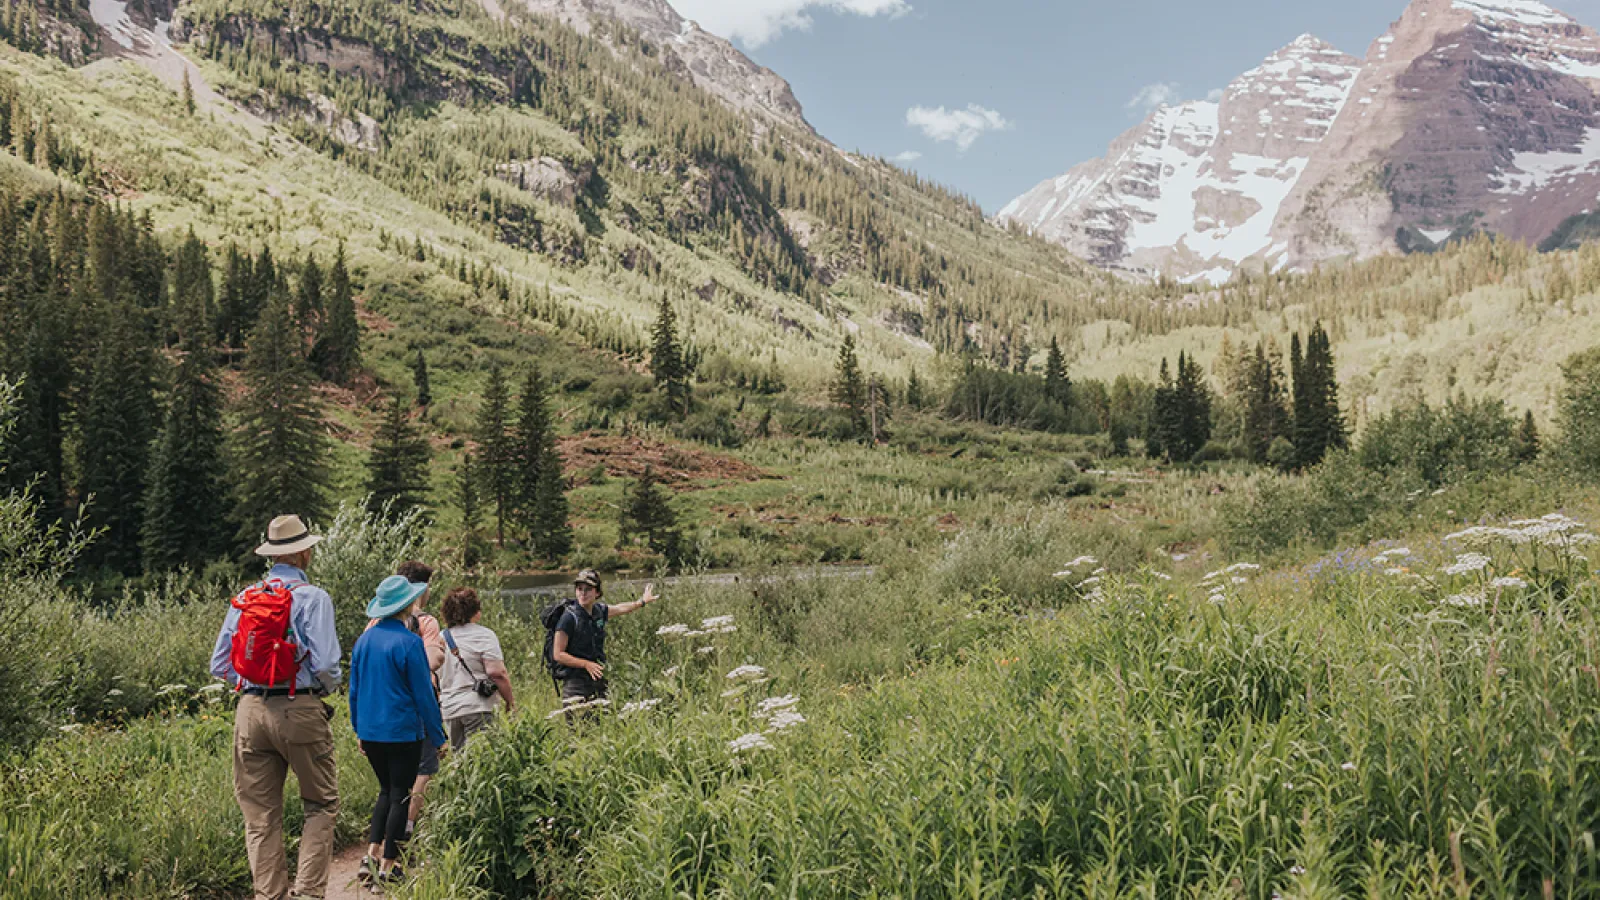 ACES hike at the Maroon Bells